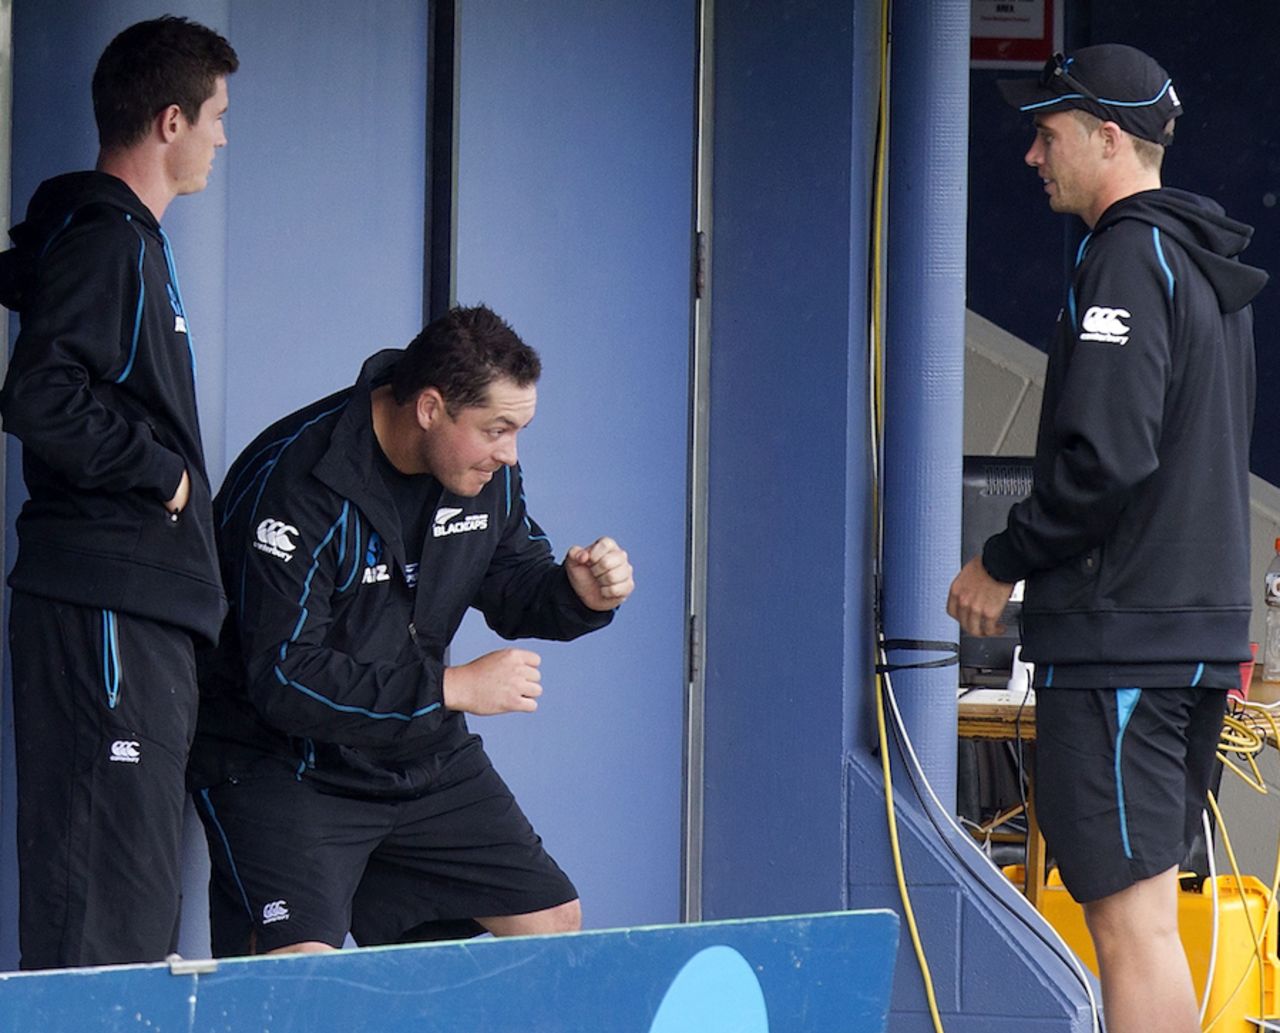 Jesse Ryder passes on boxing tips to his team-mates, New Zealand v West Indies, 2nd ODI, Napier, December 29, 2013